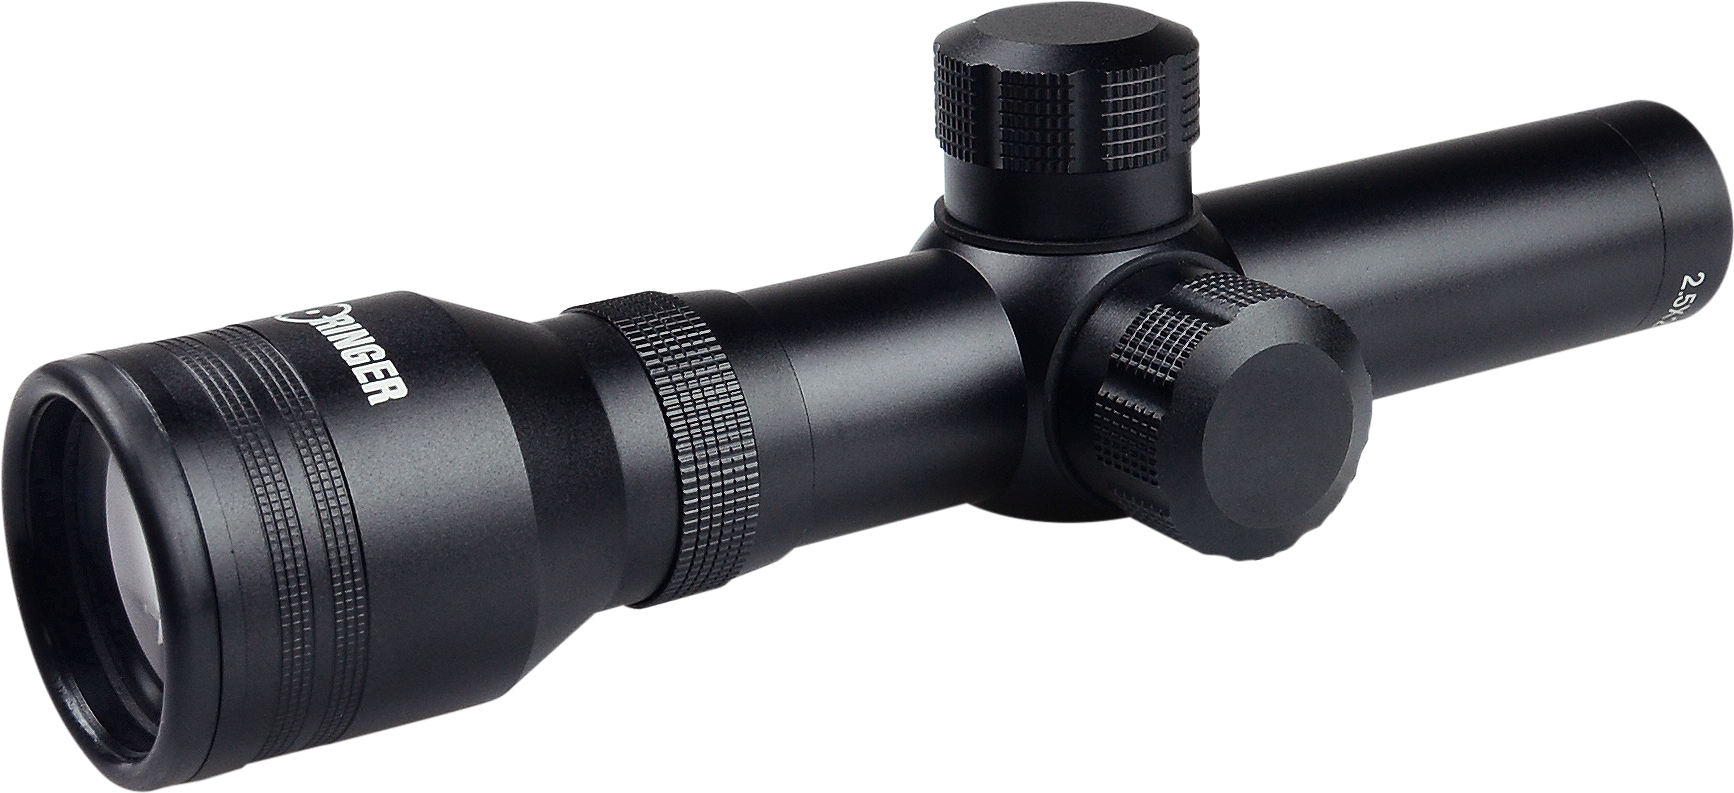 Dead Ringer 2.5x20mm Scope | 24% Off 5 Star Rating w/ Free S&H